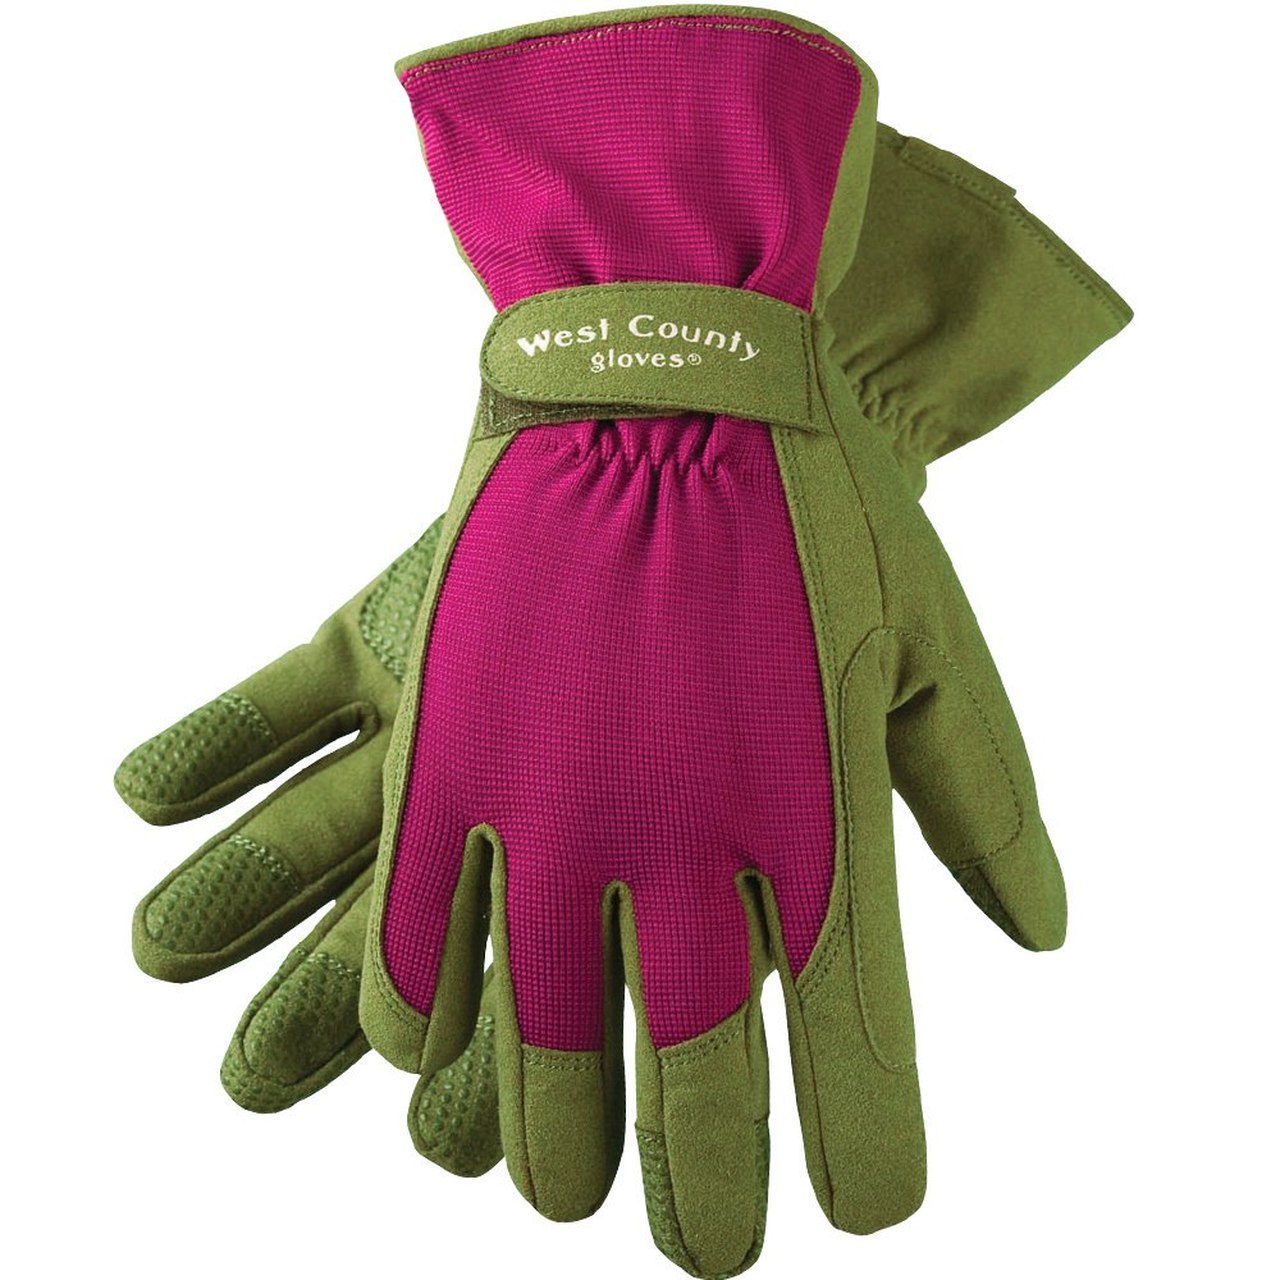 West County gloves Classic 074B/L Gloves, Unisex, L, Adjustable Wrist, Extended Cuff, Berry/Green - 1